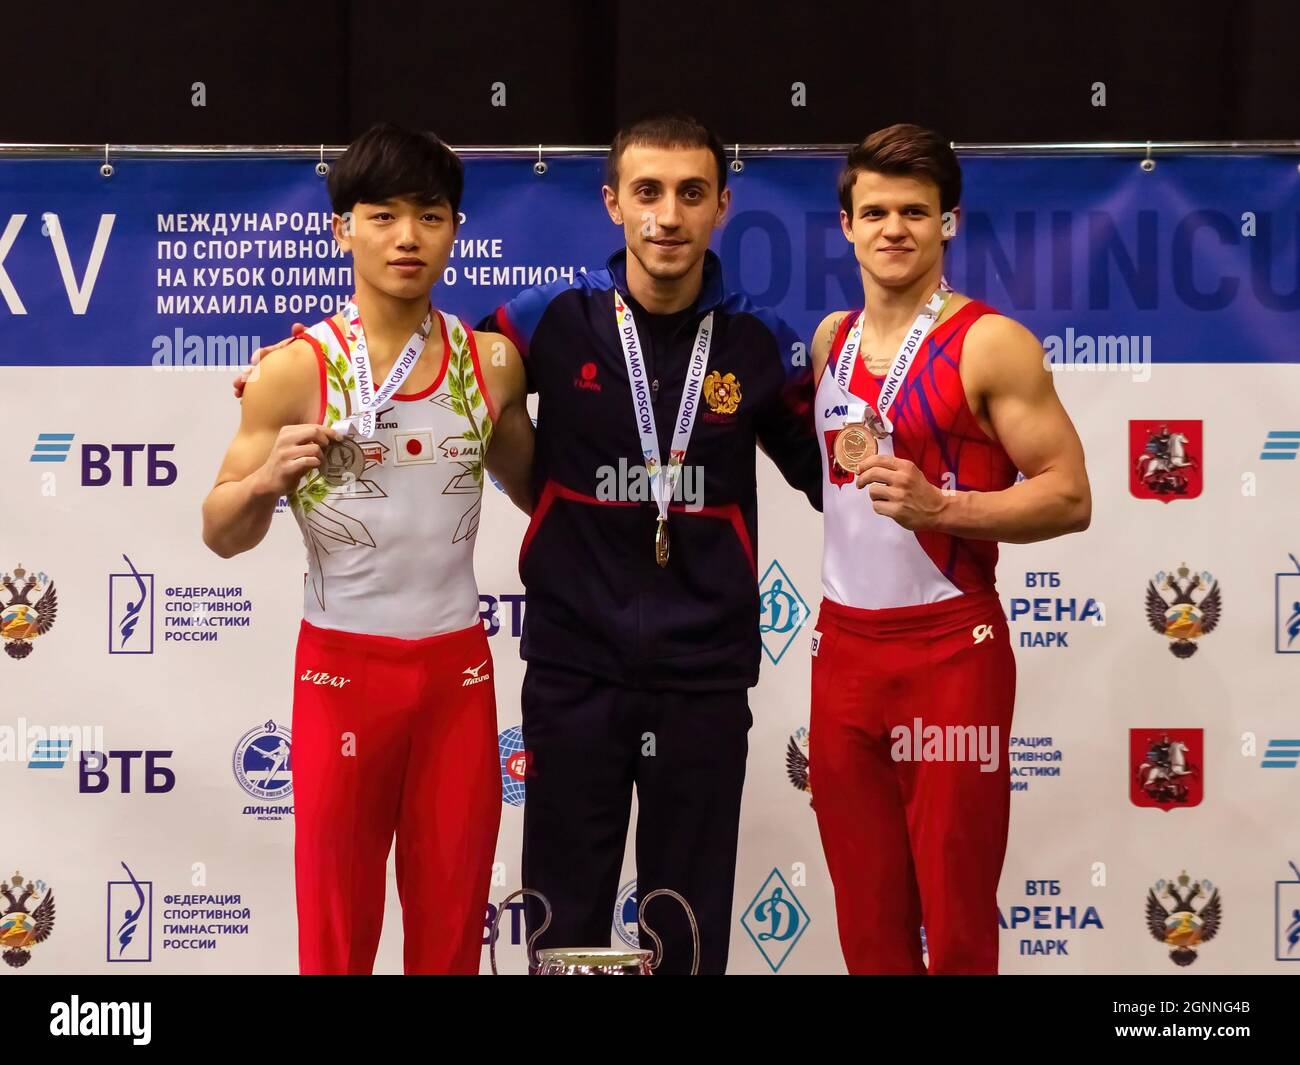 Dmitry Lankin (R), Artur Davtyan (C) and Miwa Teppi (L) seen posing with their medals during the event. The XXV International Gymnastics Tournament for the Cup of the Olympic Champion Mikhail Voronin was held at the Olimpiyskiy sports complex. Stock Photo